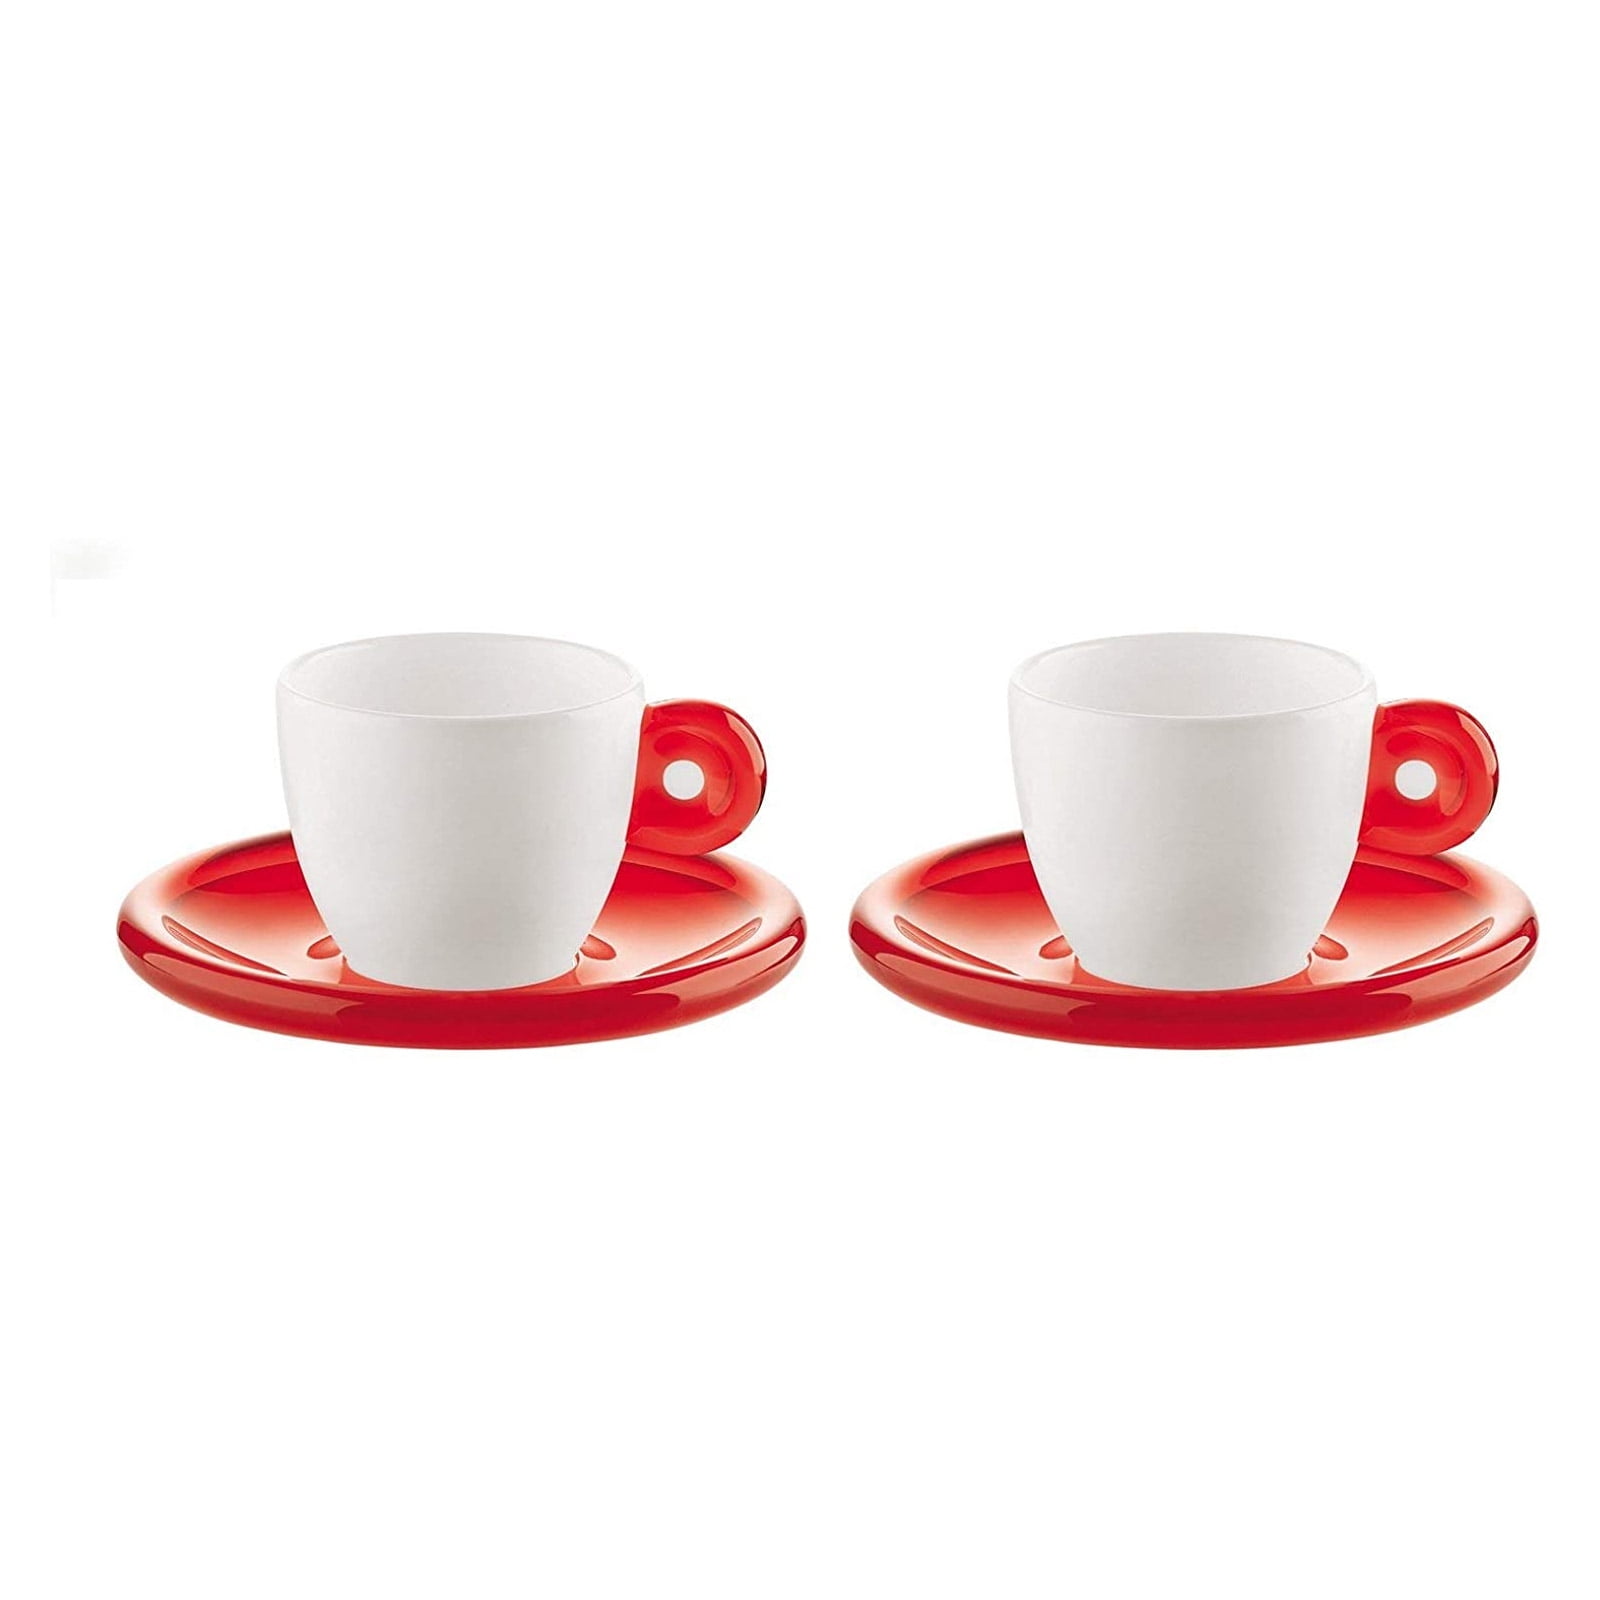 Vtg ILLY Red Logo Bar Espresso Cappuccino Cups, Collectible Coffee Cups, Italian  Espresso Bar Cups Made in Italy 